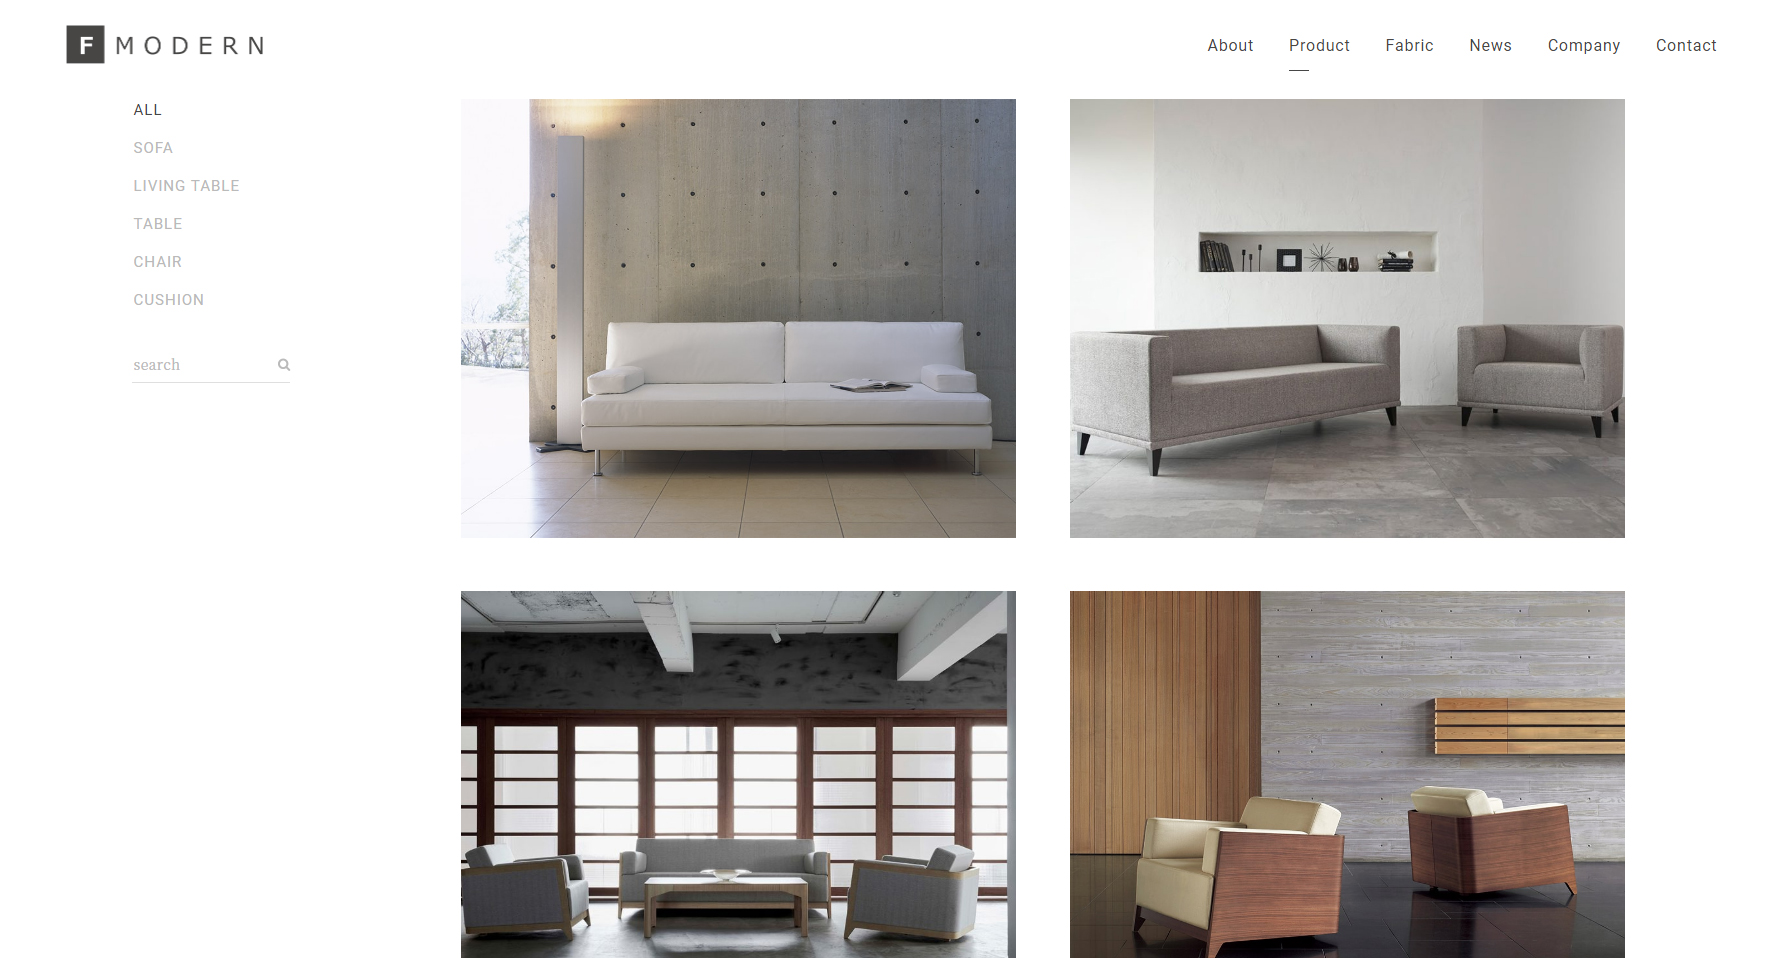 F MODERN - Website of the Day